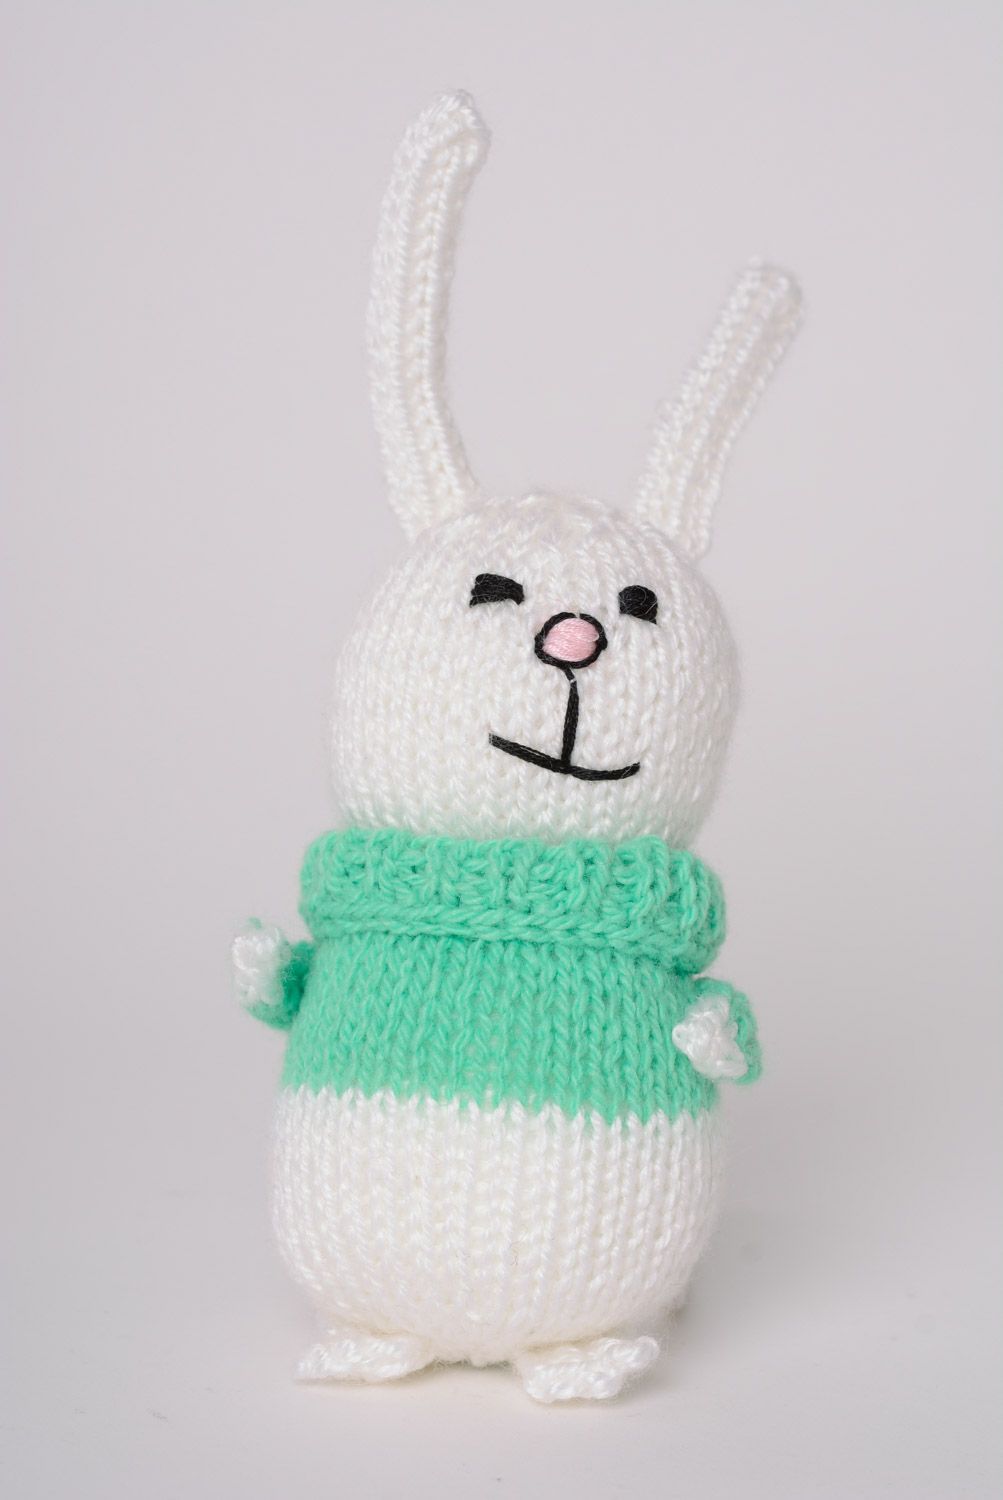 Handmade white knitted soft hare in green sweater photo 1